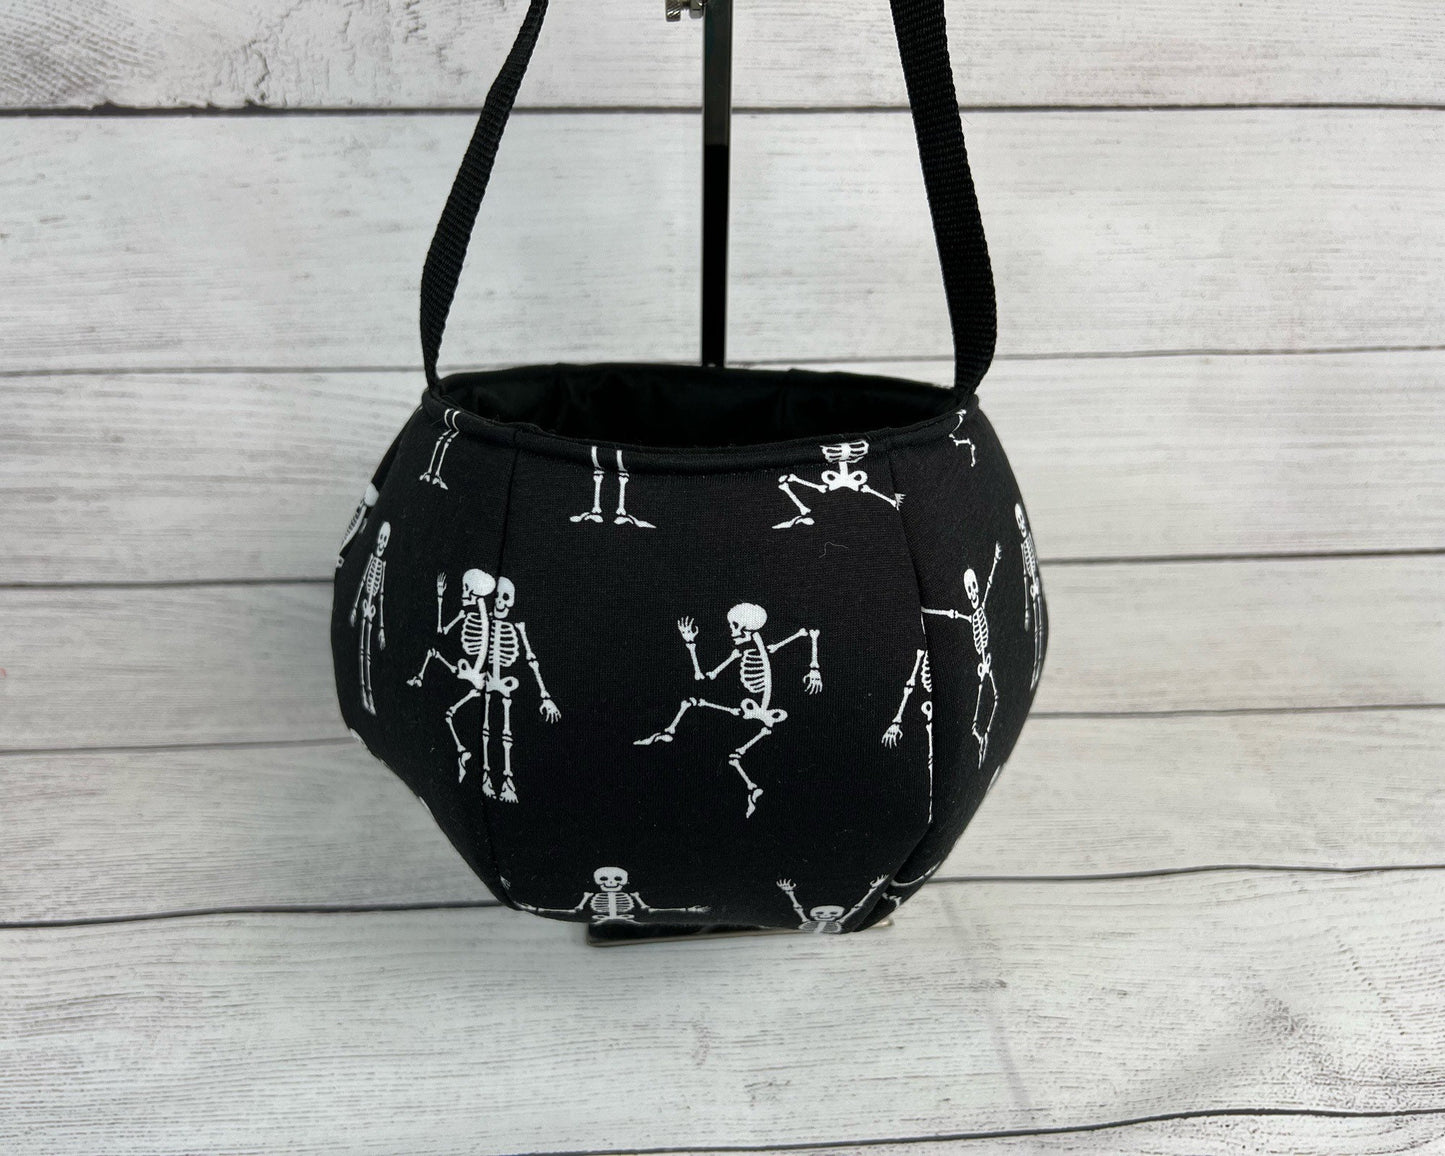 Classic Yoga Skeleton Tote Bag - Bag - Tote - Skeletons - White and Black  - Everyday - Holiday - Easter - Halloween - Party - Gift